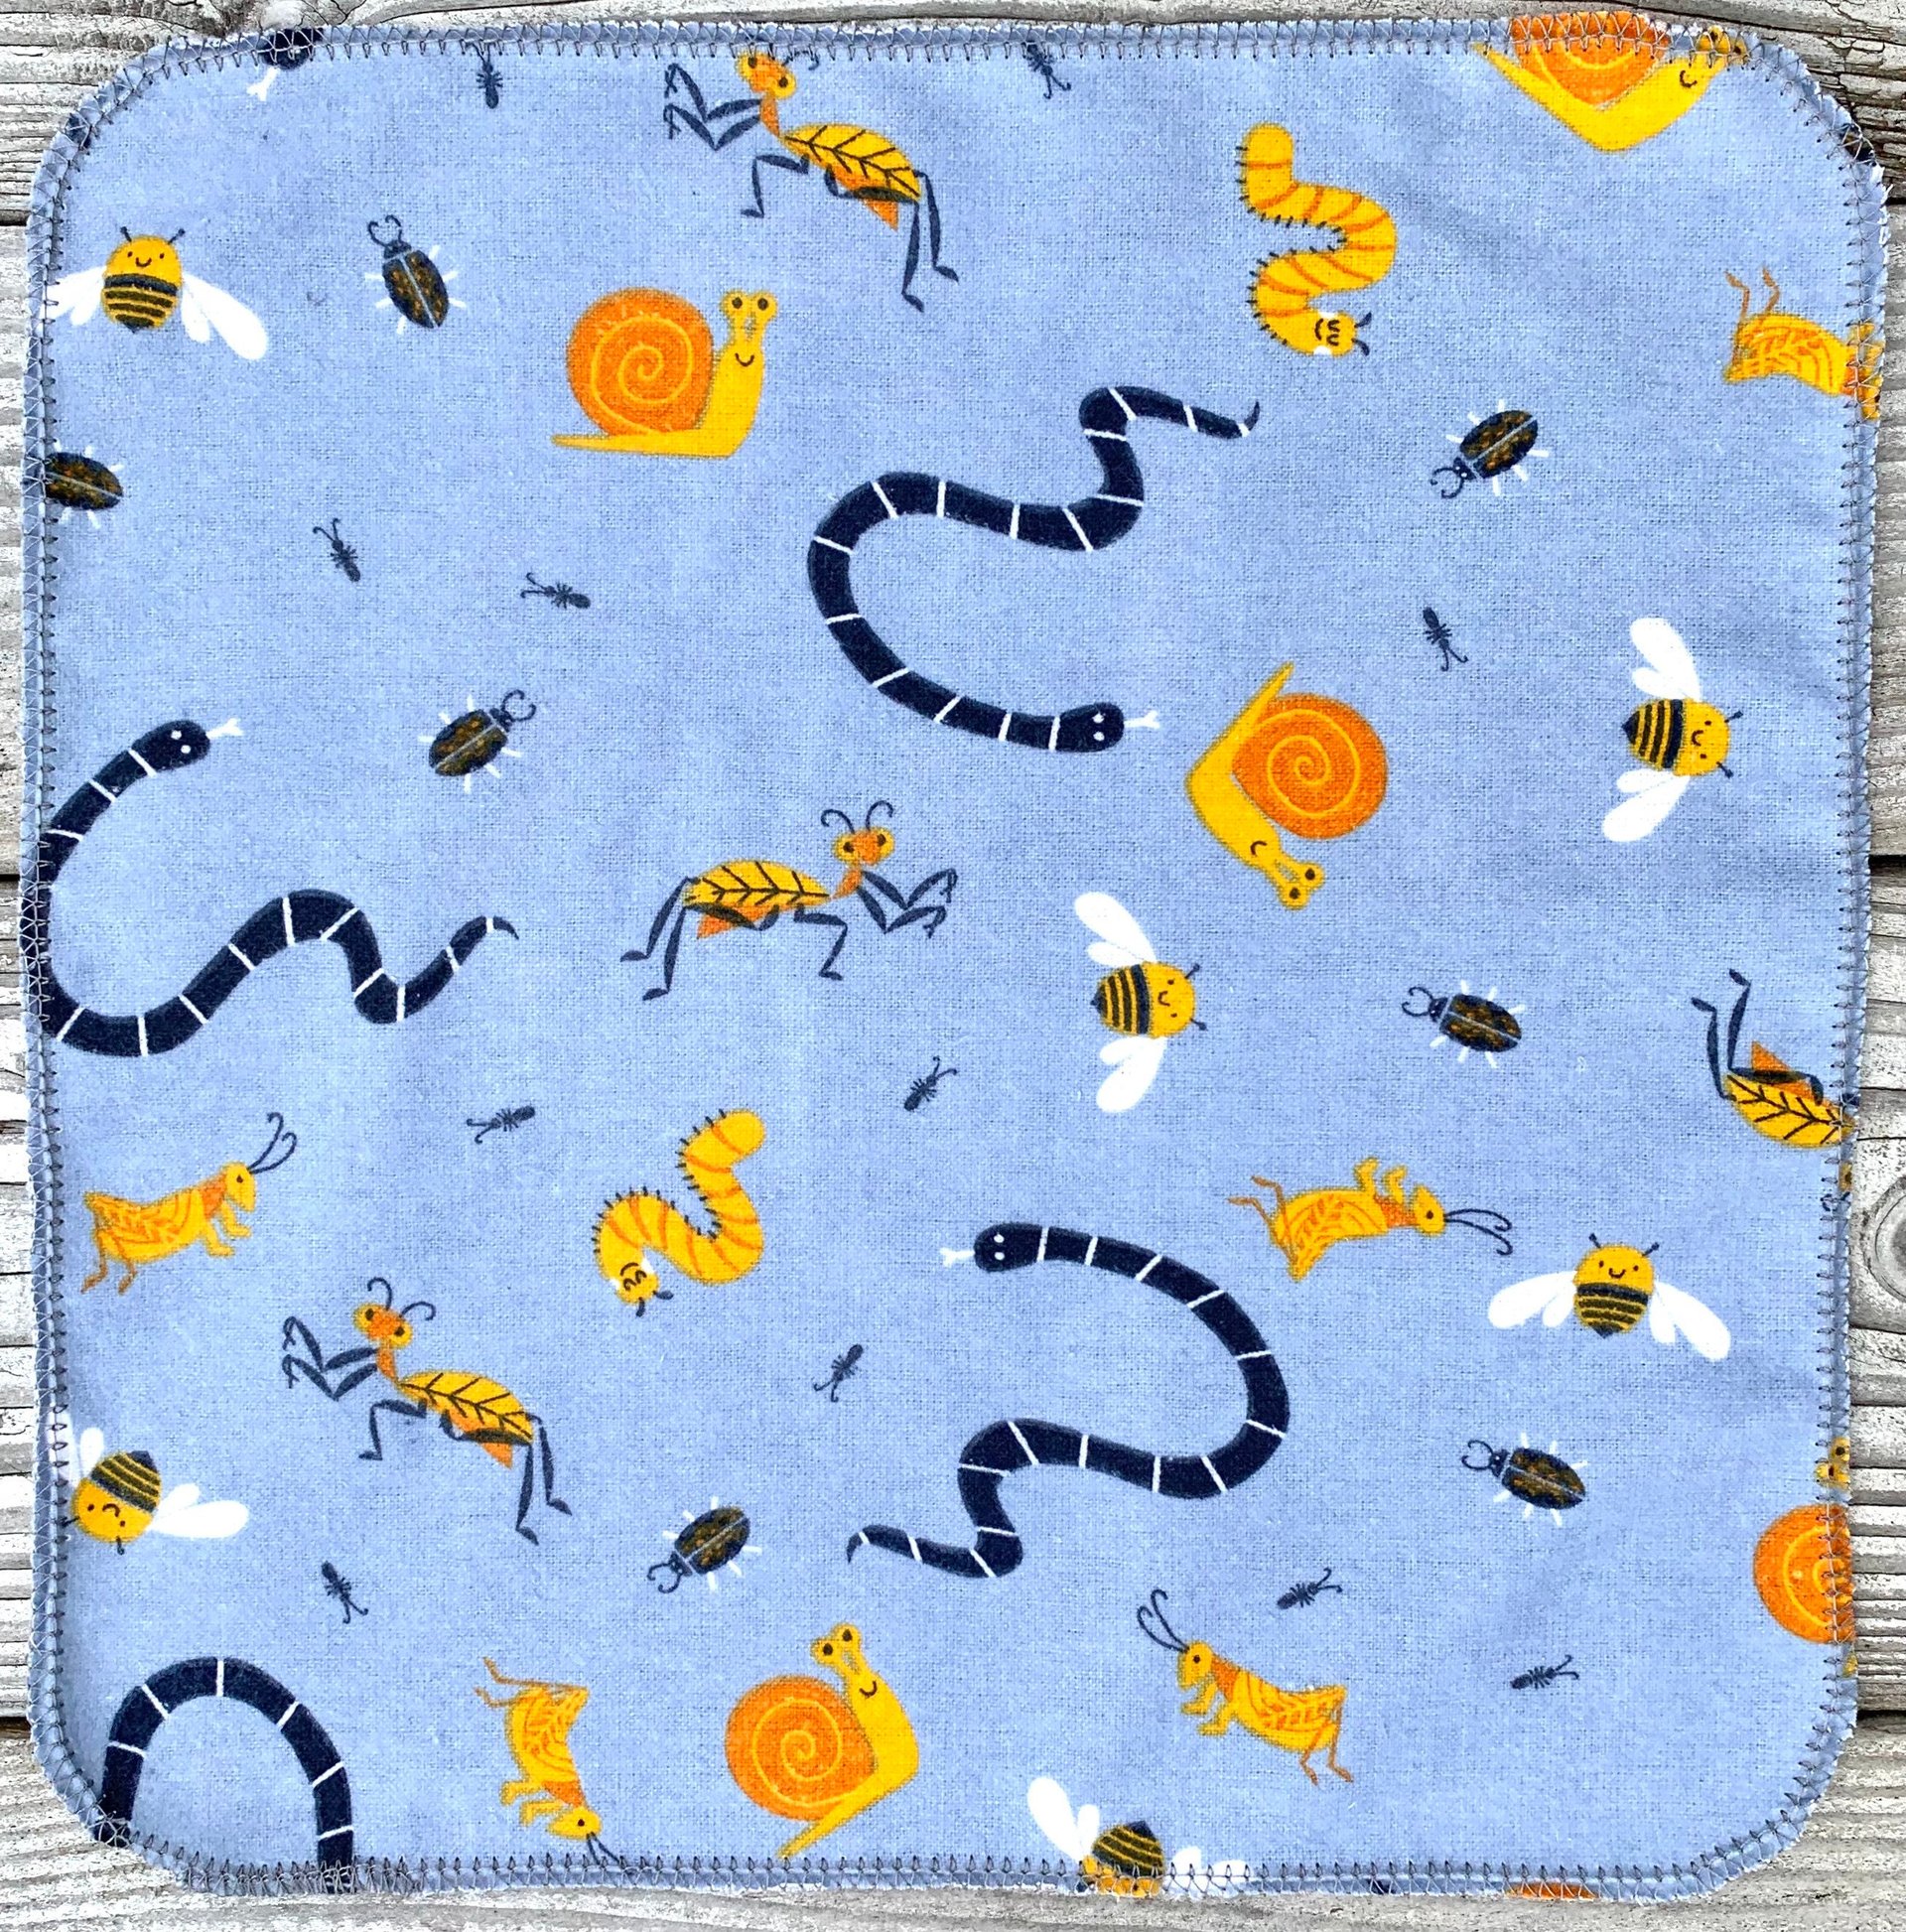 Snails • Snakes & Bees Paperless Towels || Unpaper Towels || Eco Sustainable Kitchen